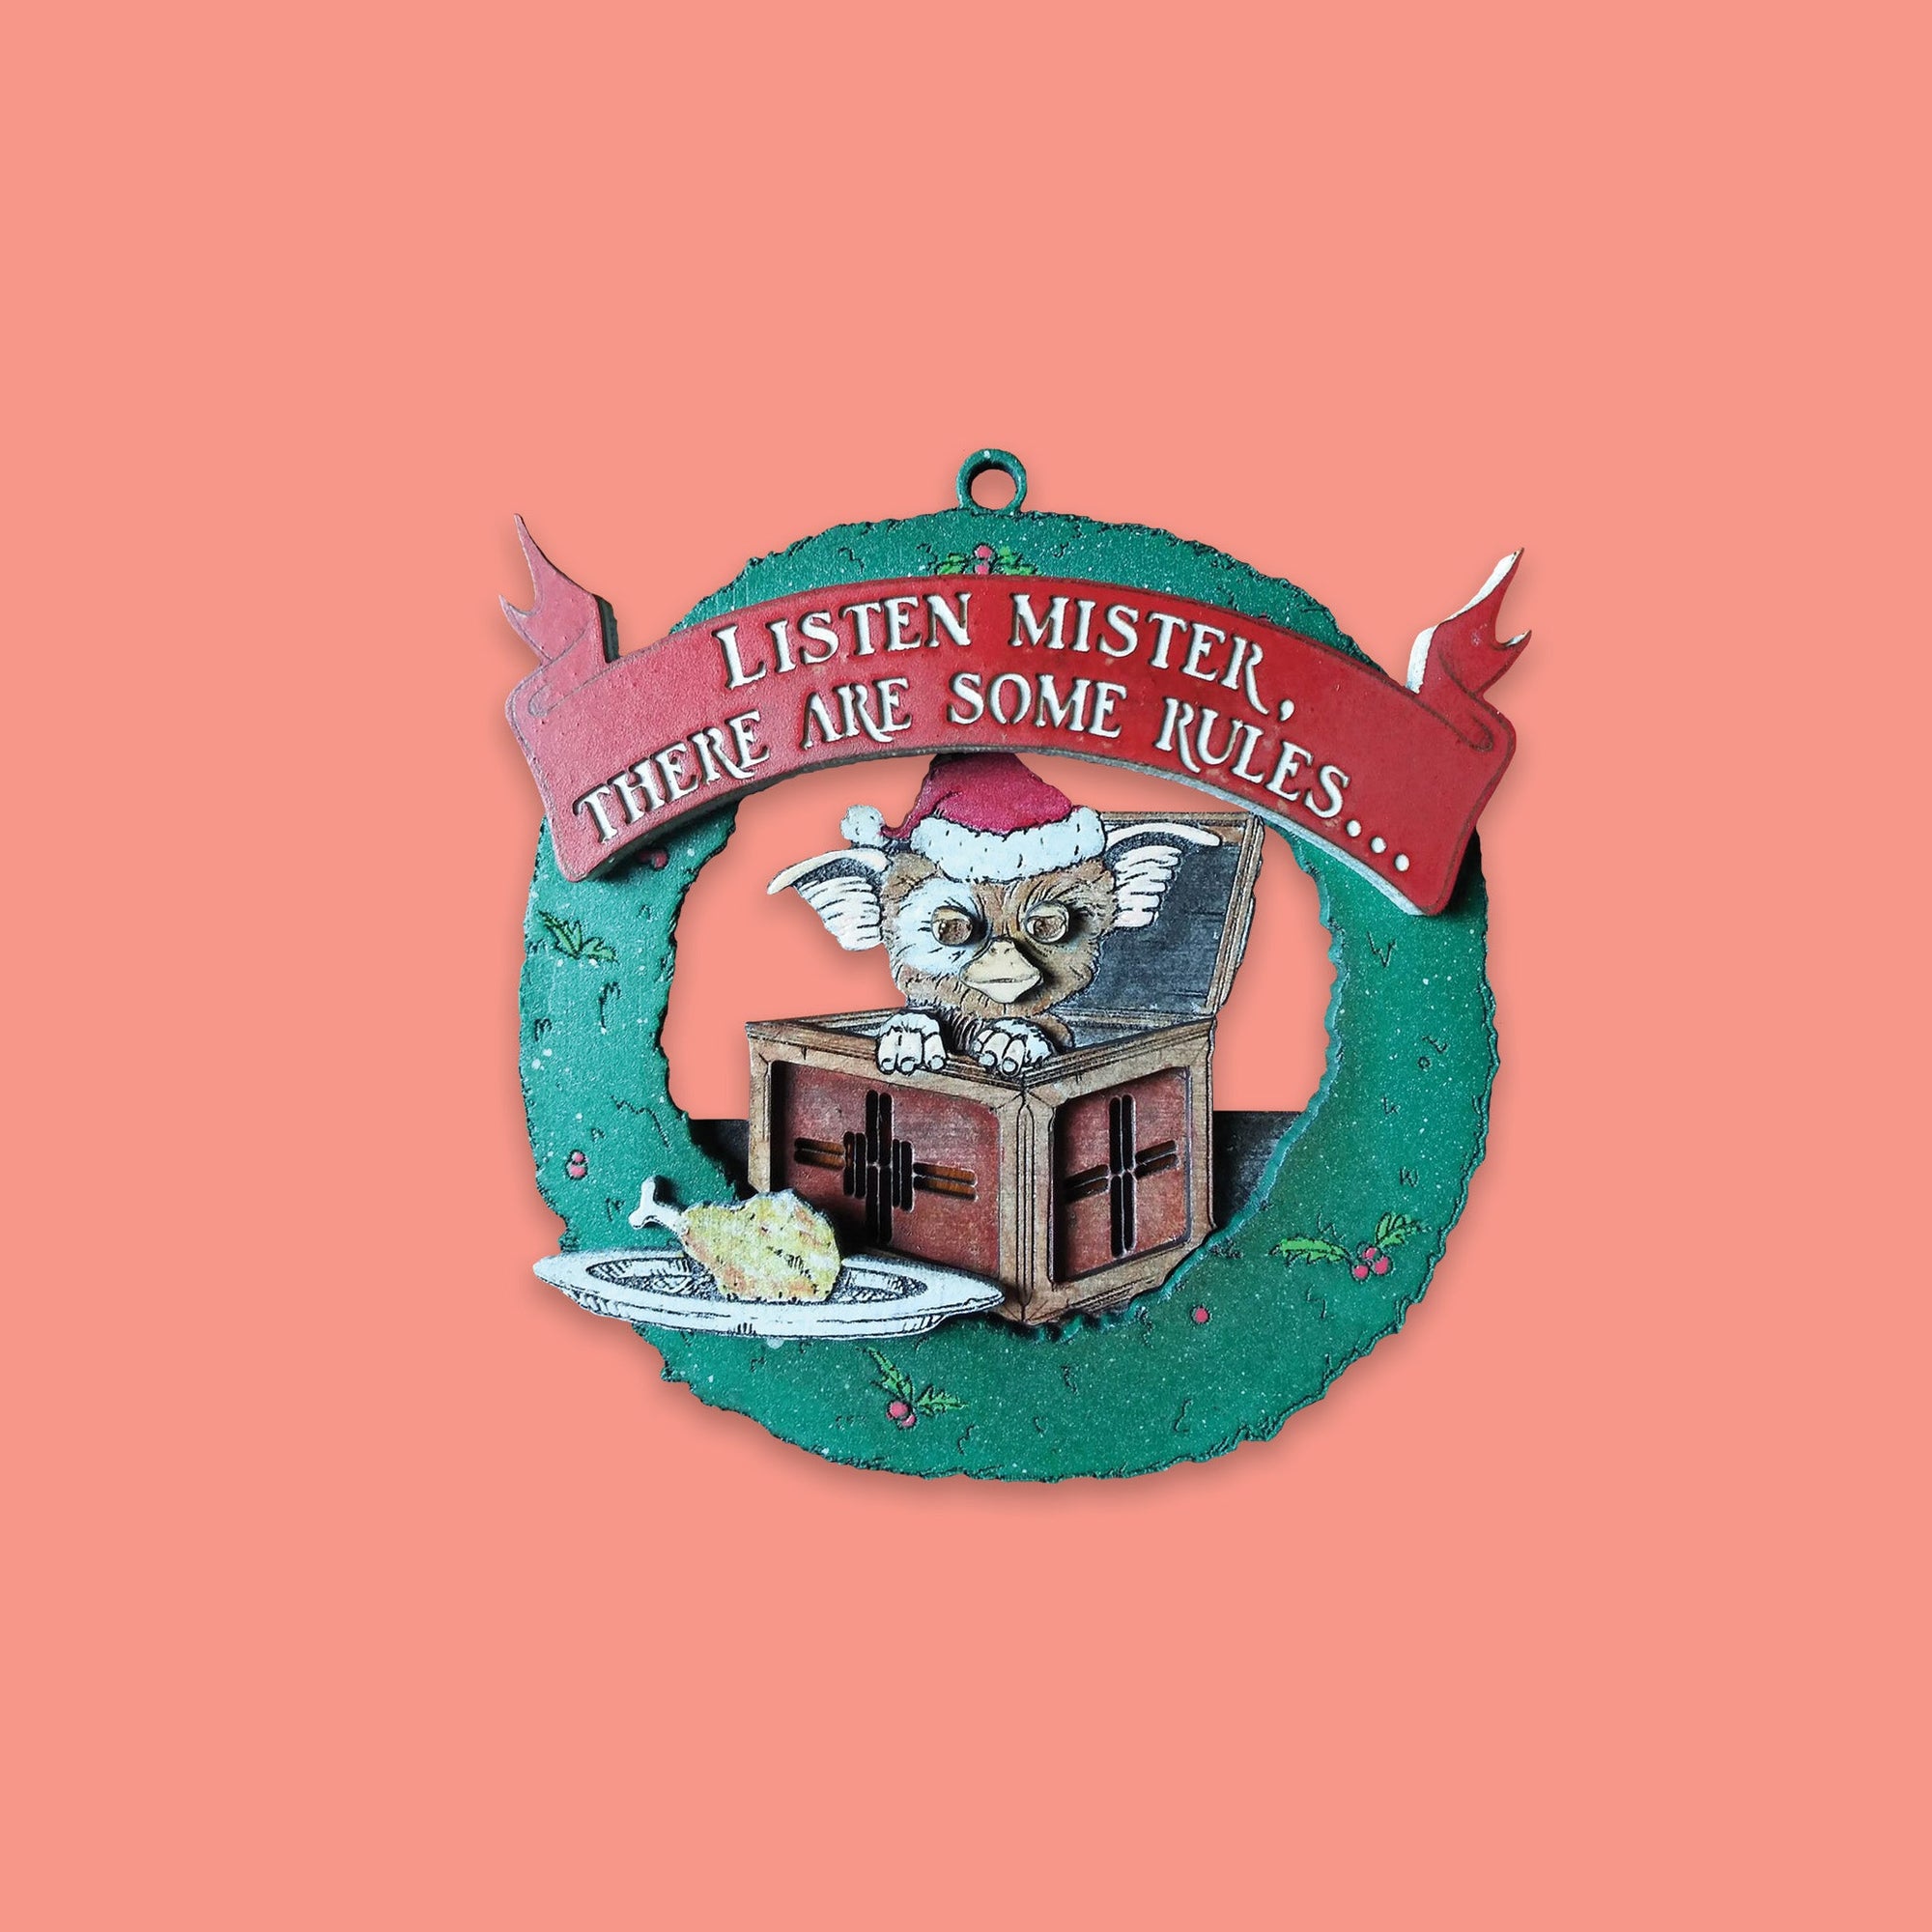 On a coral pink background sits a wreath ornament. This Gremlins inspired wood ornament is a green wreath with Gizmo wearing a santa hat and sitting in an opened box. There is a plate with a chicken leg on it. At the top is a red banner that says "LISTEN MISTER, THERE ARE SOME RULES..." in white lettering. 